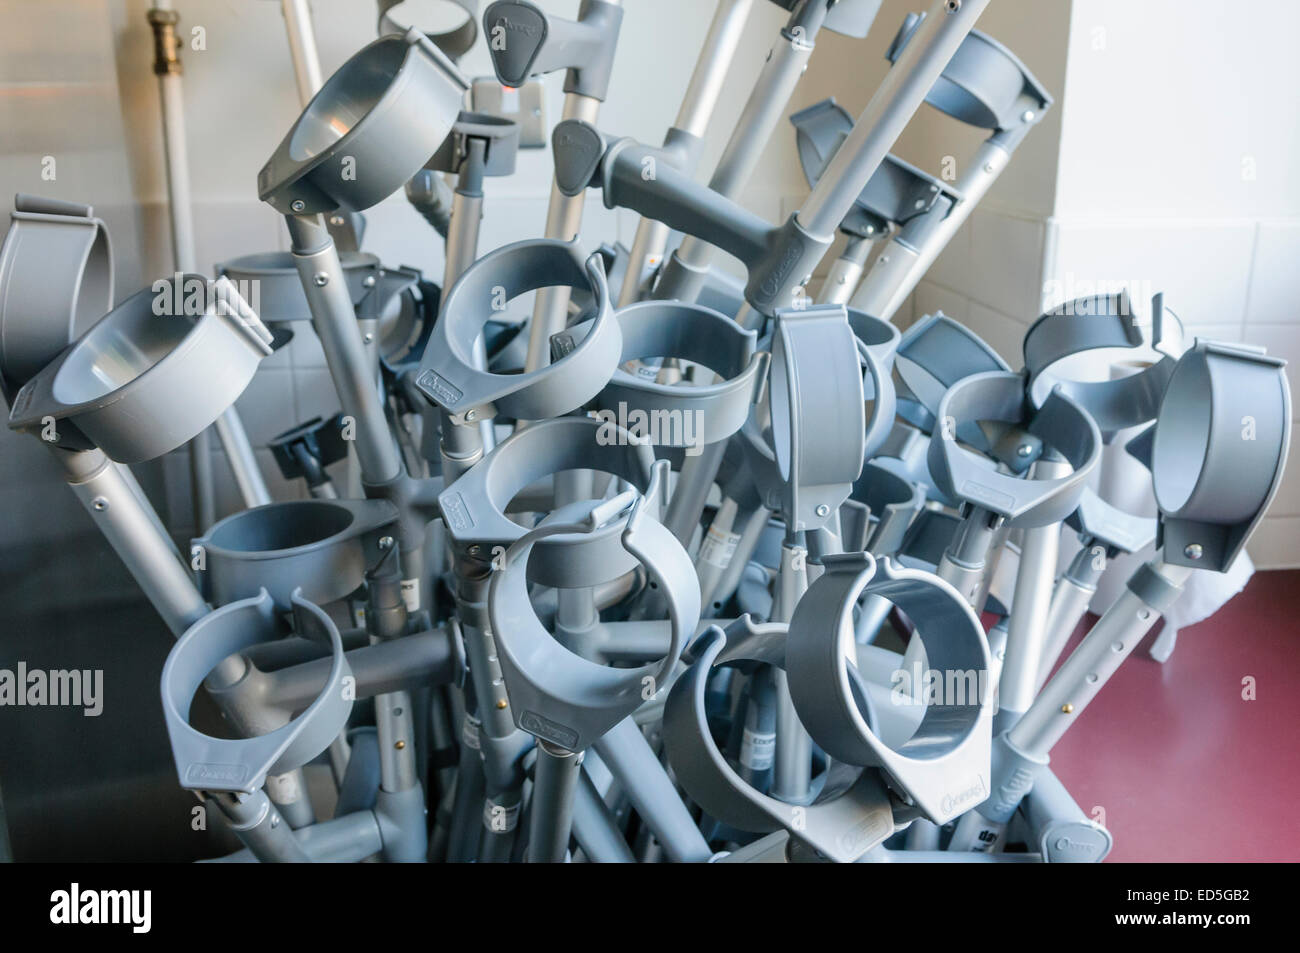 Lots of crutches in a hospital Stock Photo